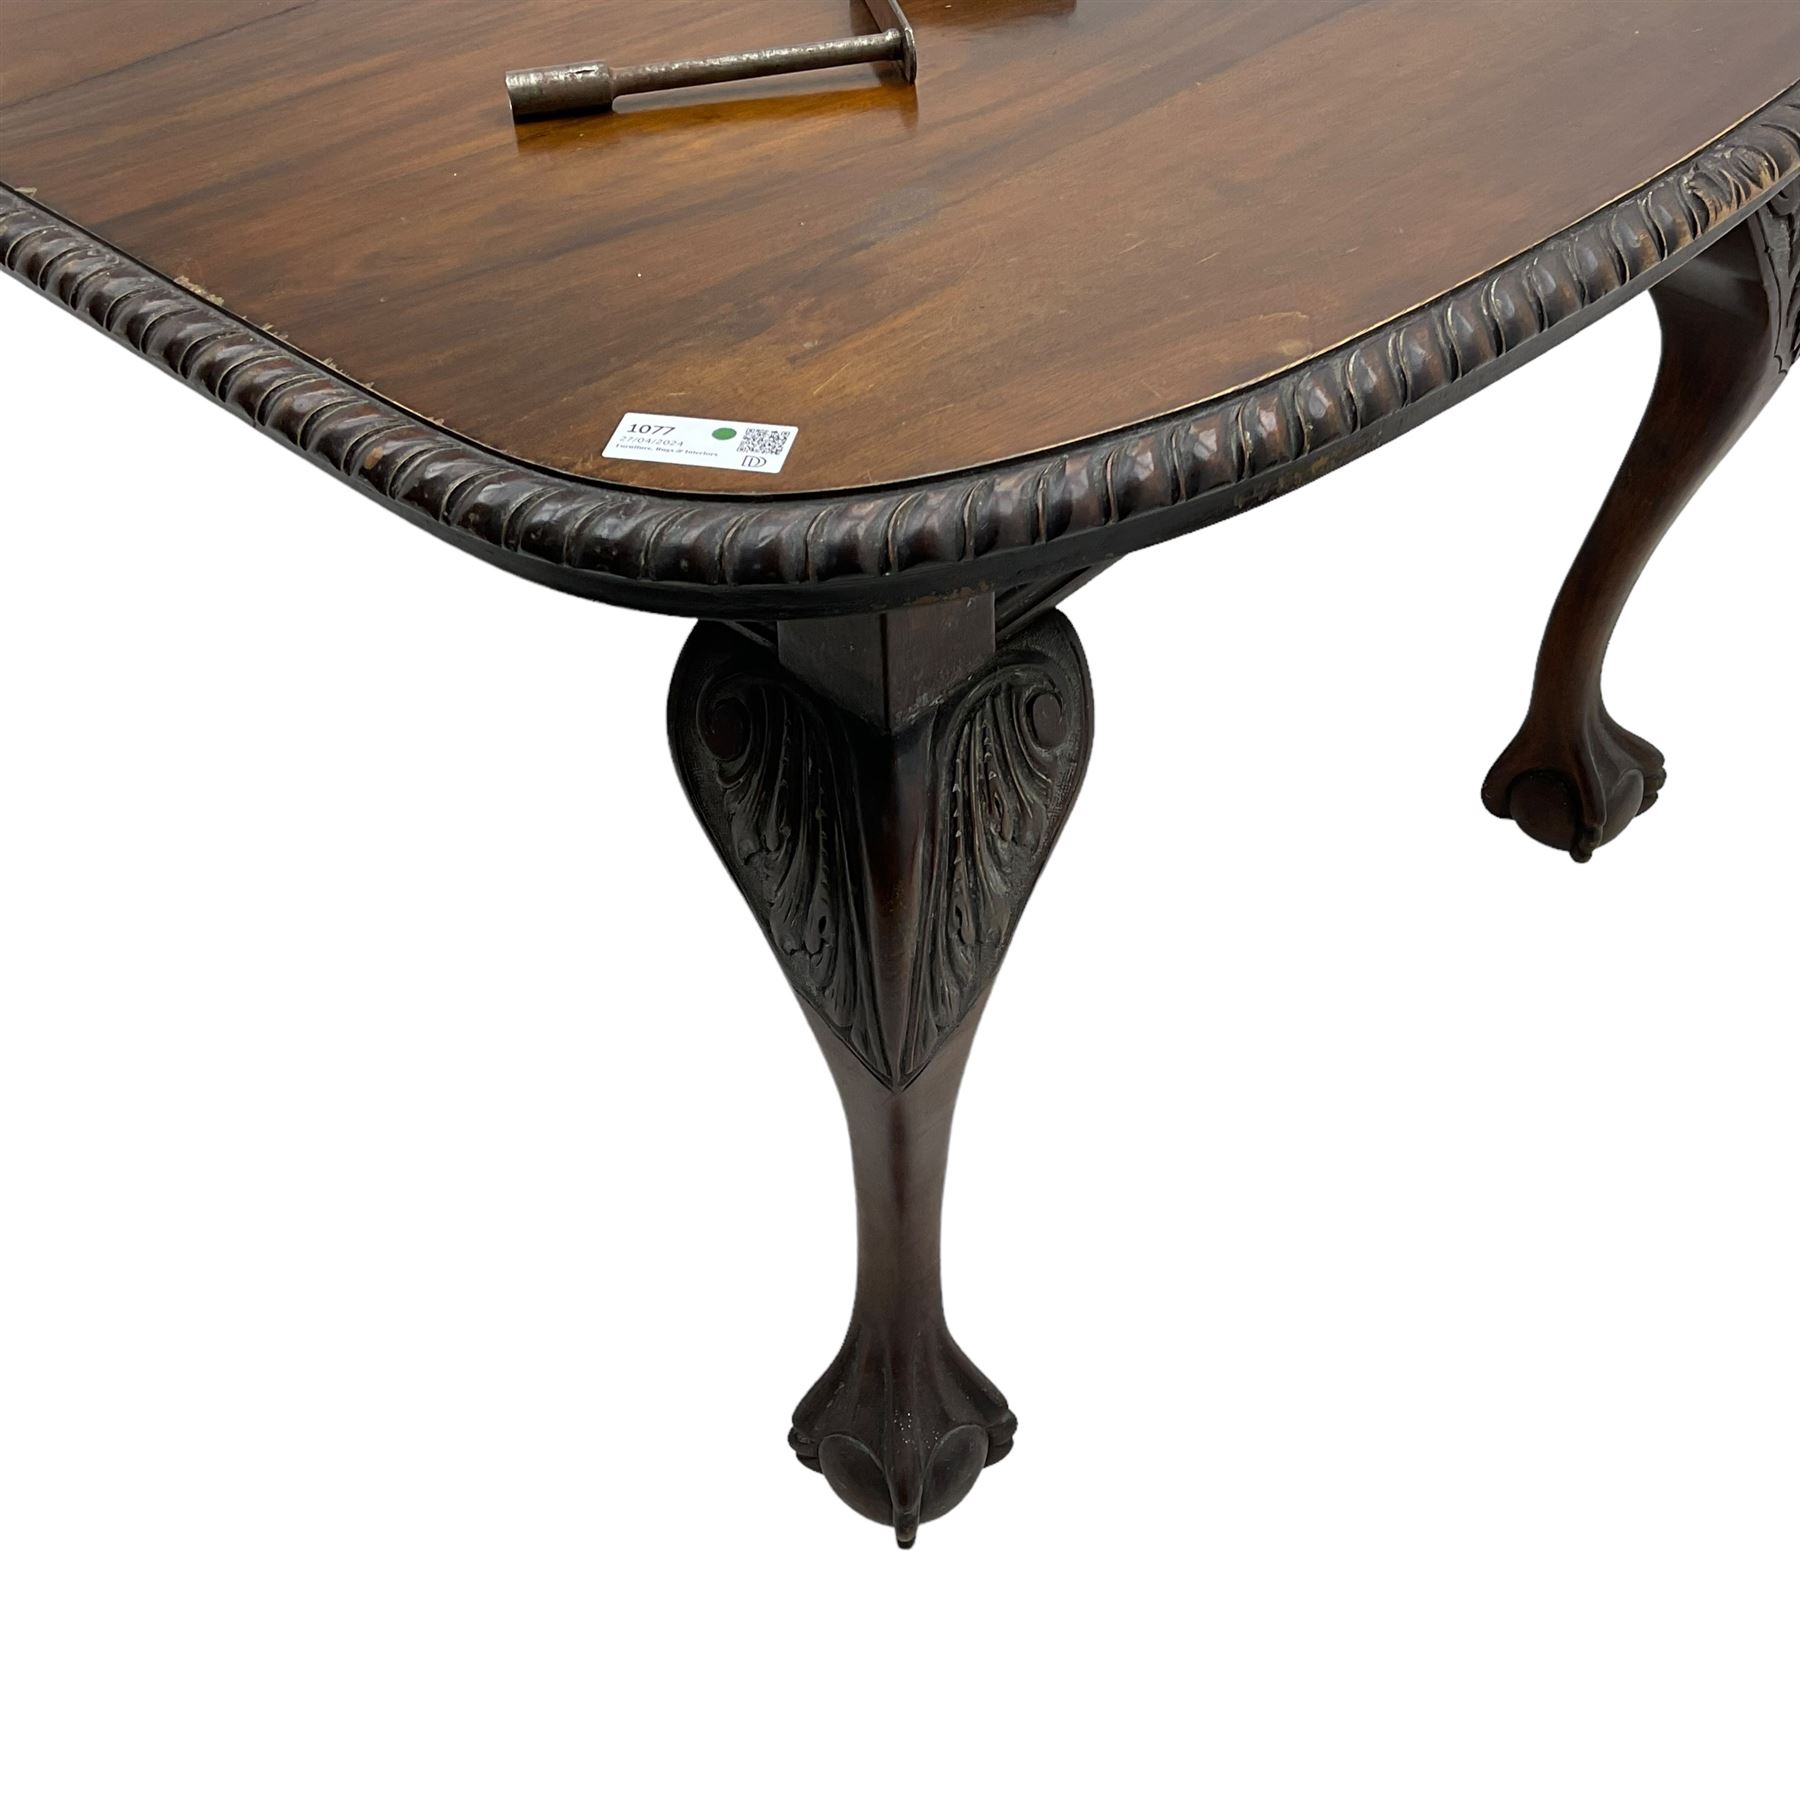 Early 20th century Georgian design mahogany extending dining table - Image 6 of 8